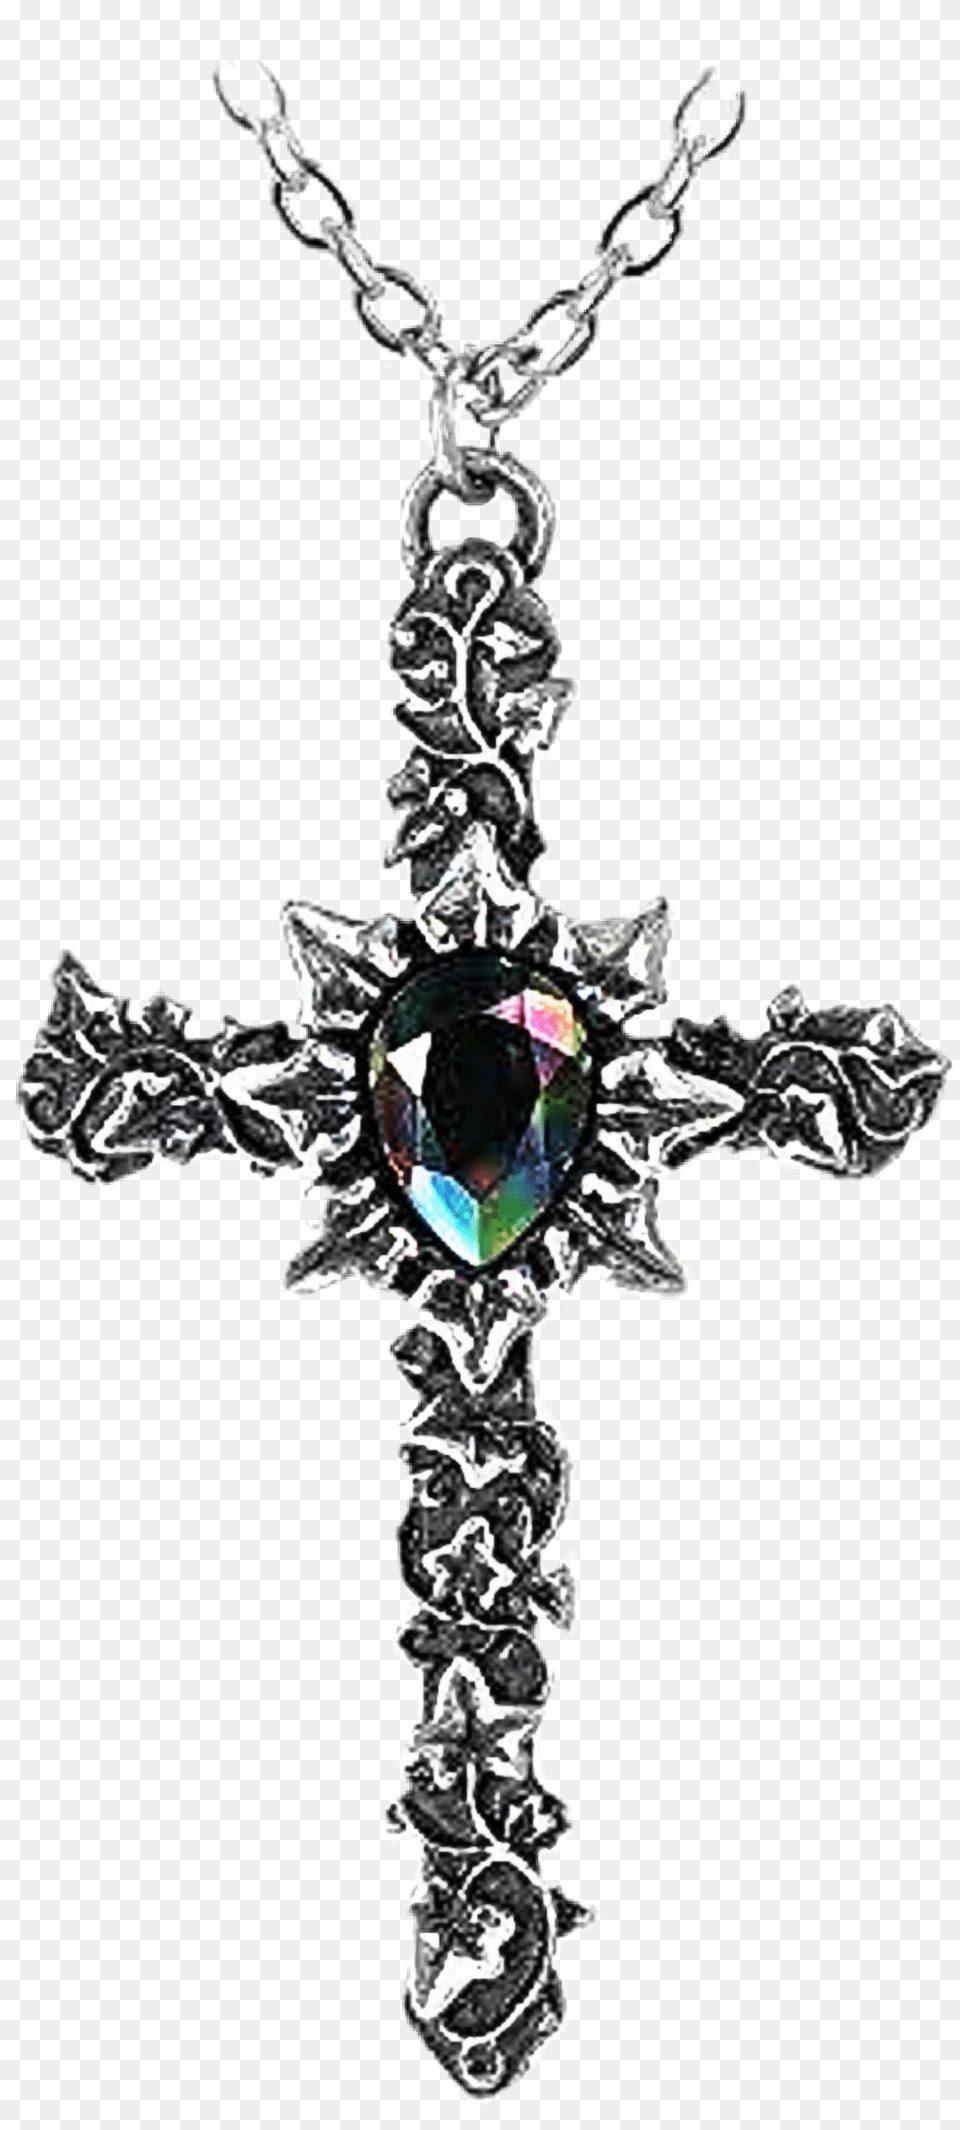 Cross Necklace Crossnecklace Crucifix Rosary Cross Rainbow Gem Necklaace, Accessories, Symbol, Jewelry, Person Free Transparent Png